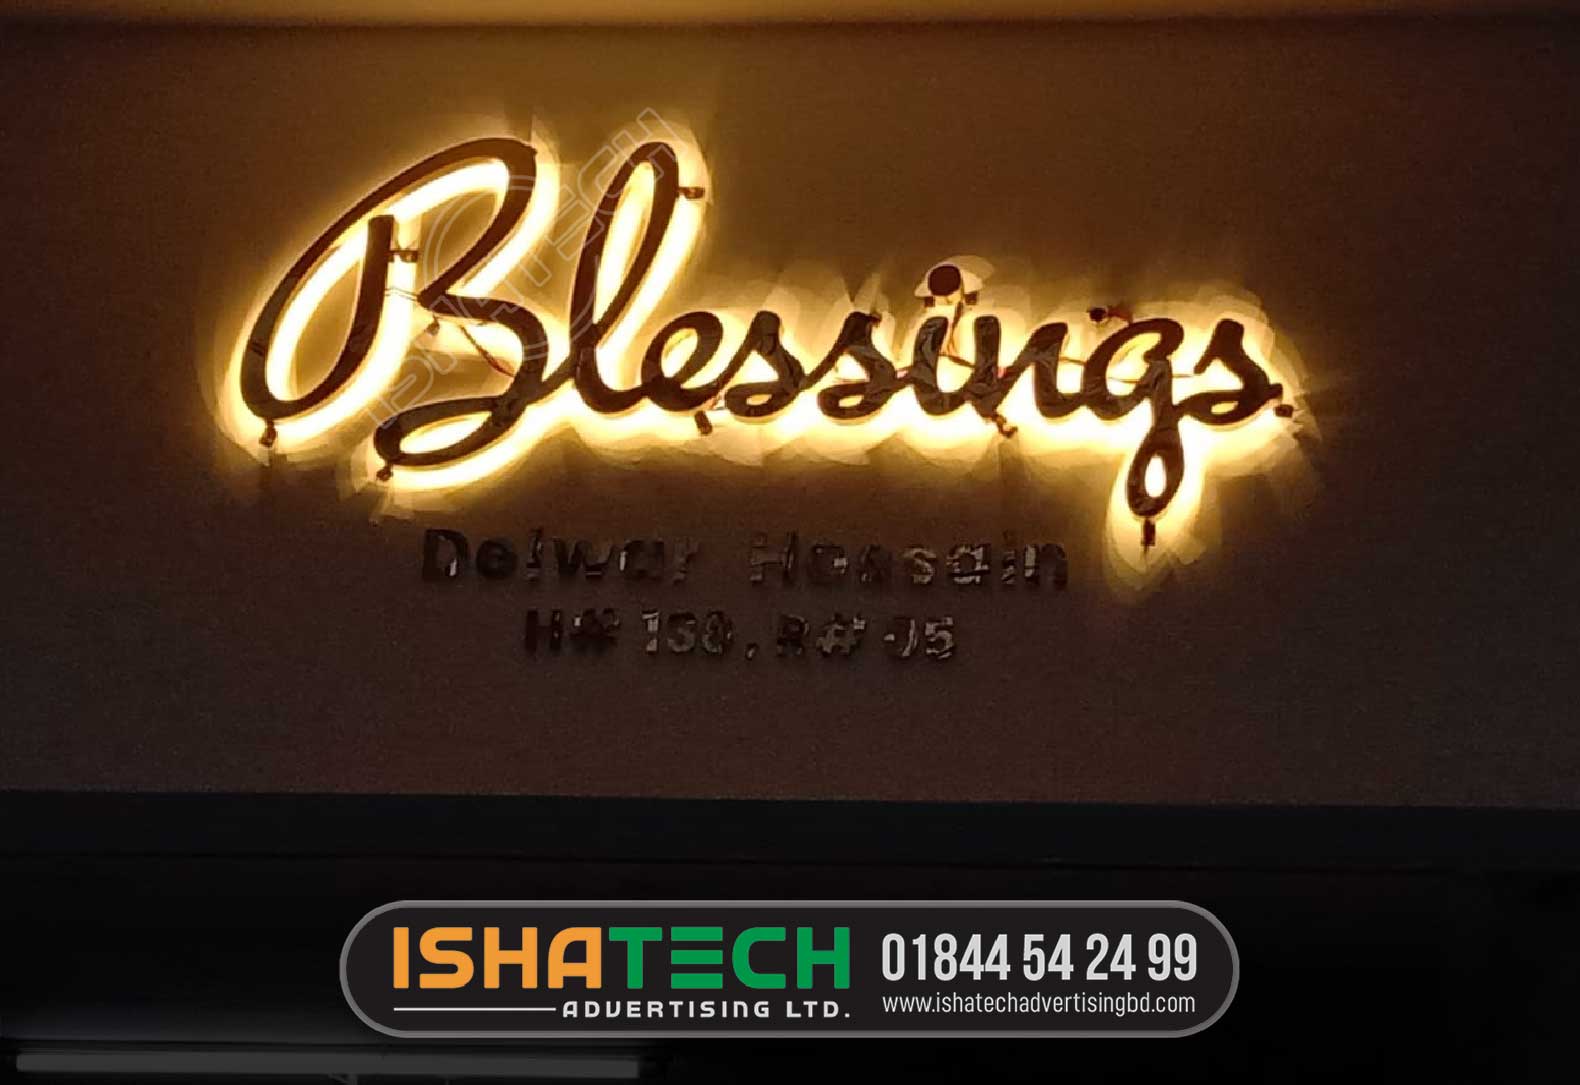 BLESSINGS GOLDEN COLOR SS LETTER MAKING BY ISHATECH ADVERTISING, GOLDEN LETTER MAKER BD, LETTER SIGNAGE AGENCY IN CHITTAGONG,